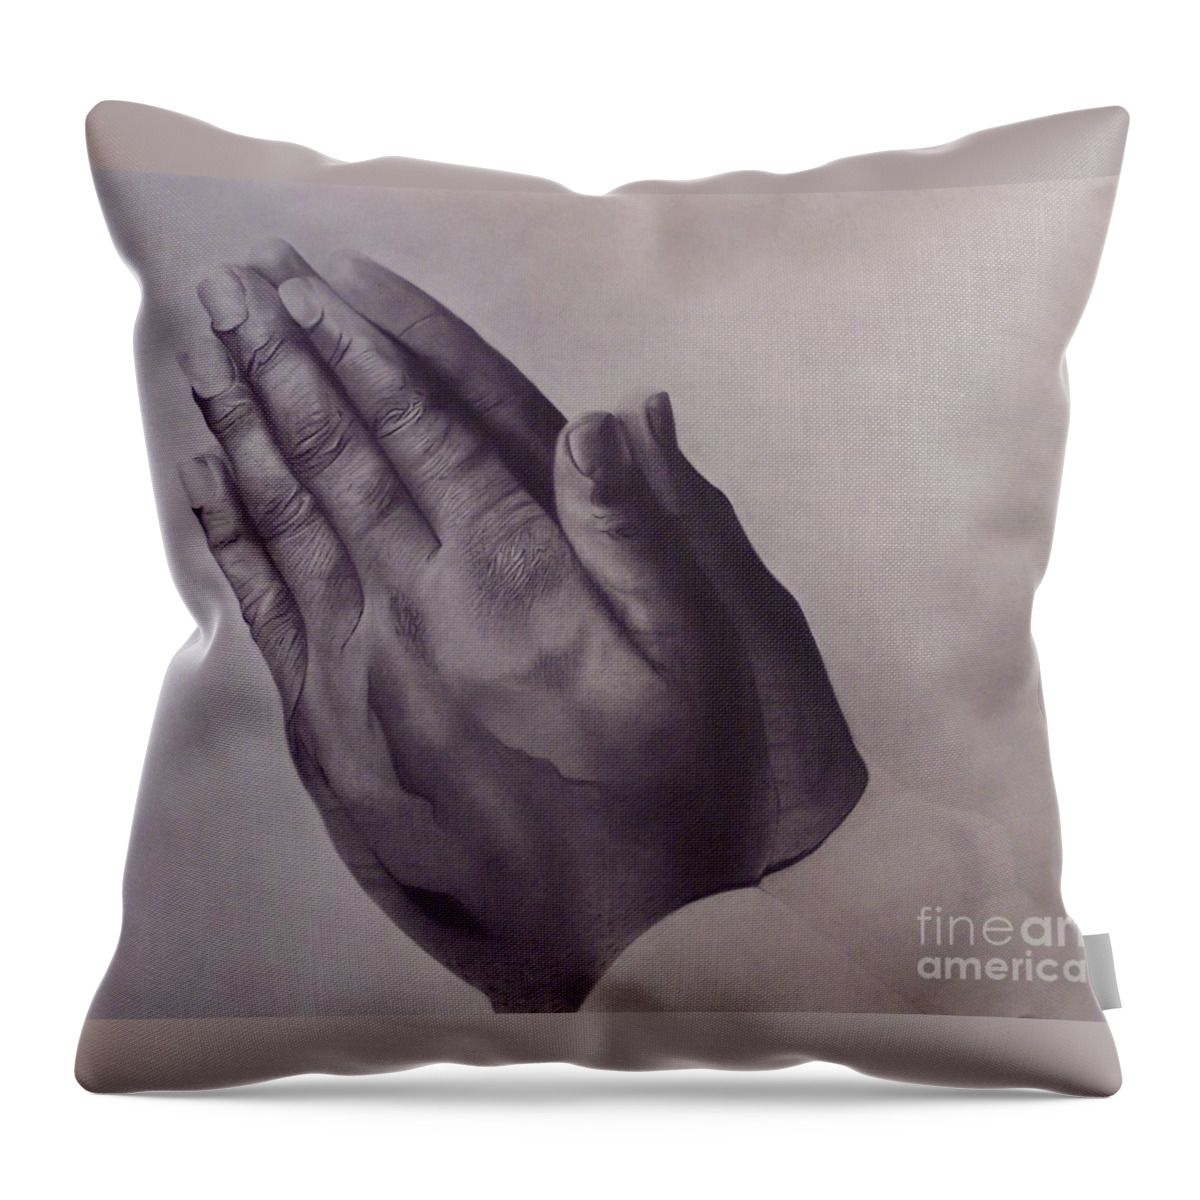 Hands Throw Pillow featuring the drawing Grateful One by Wil Golden